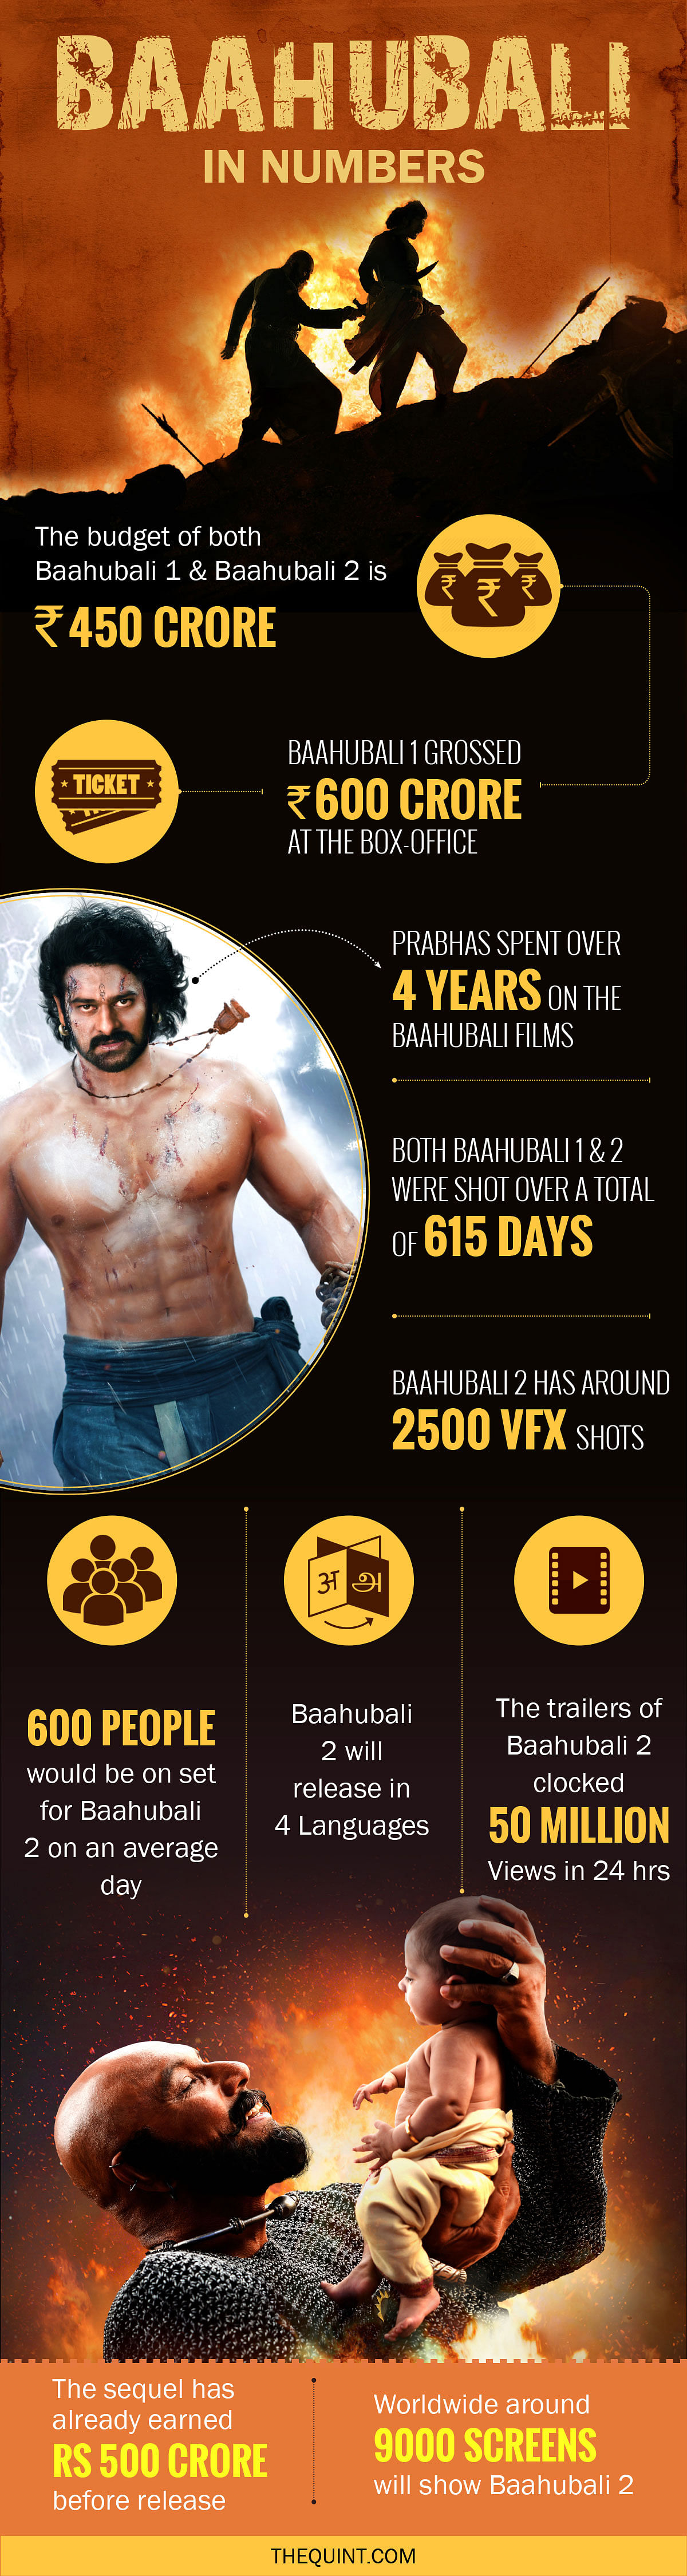 ‘Baahubali 2’ releases in over 9,000 screens. Find out more about the film’s budget and other interesting facts.